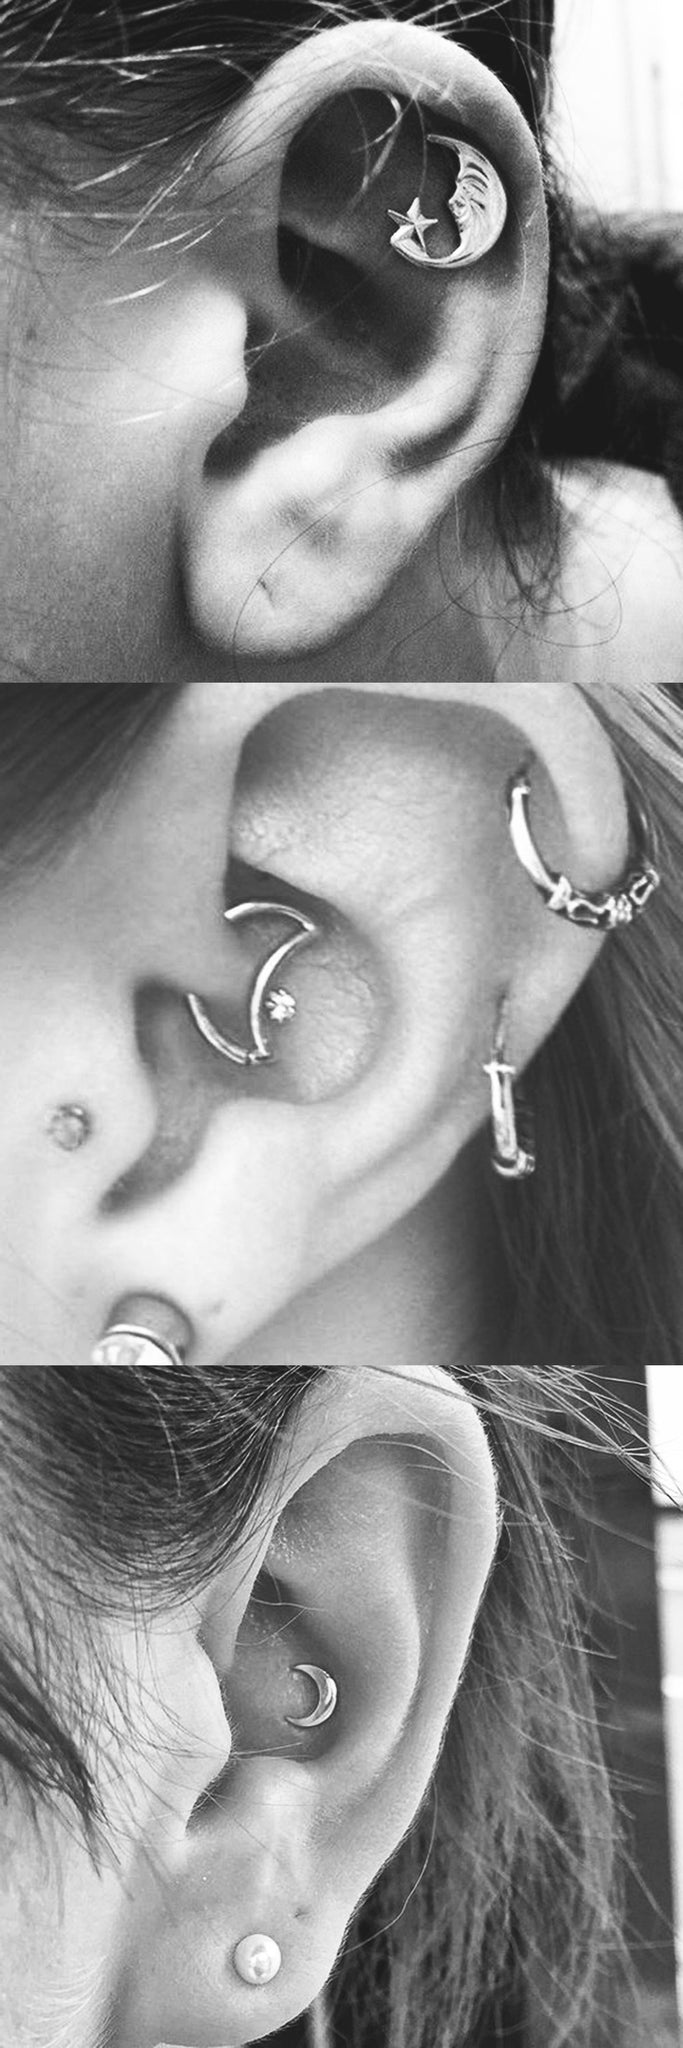 Cool Multiple Ear Piercing Ideas - Moon Cartilage Stud - Crecent Daith Rook Earring - Small Gold Moon Conch Barbell at MyBodiArt.com